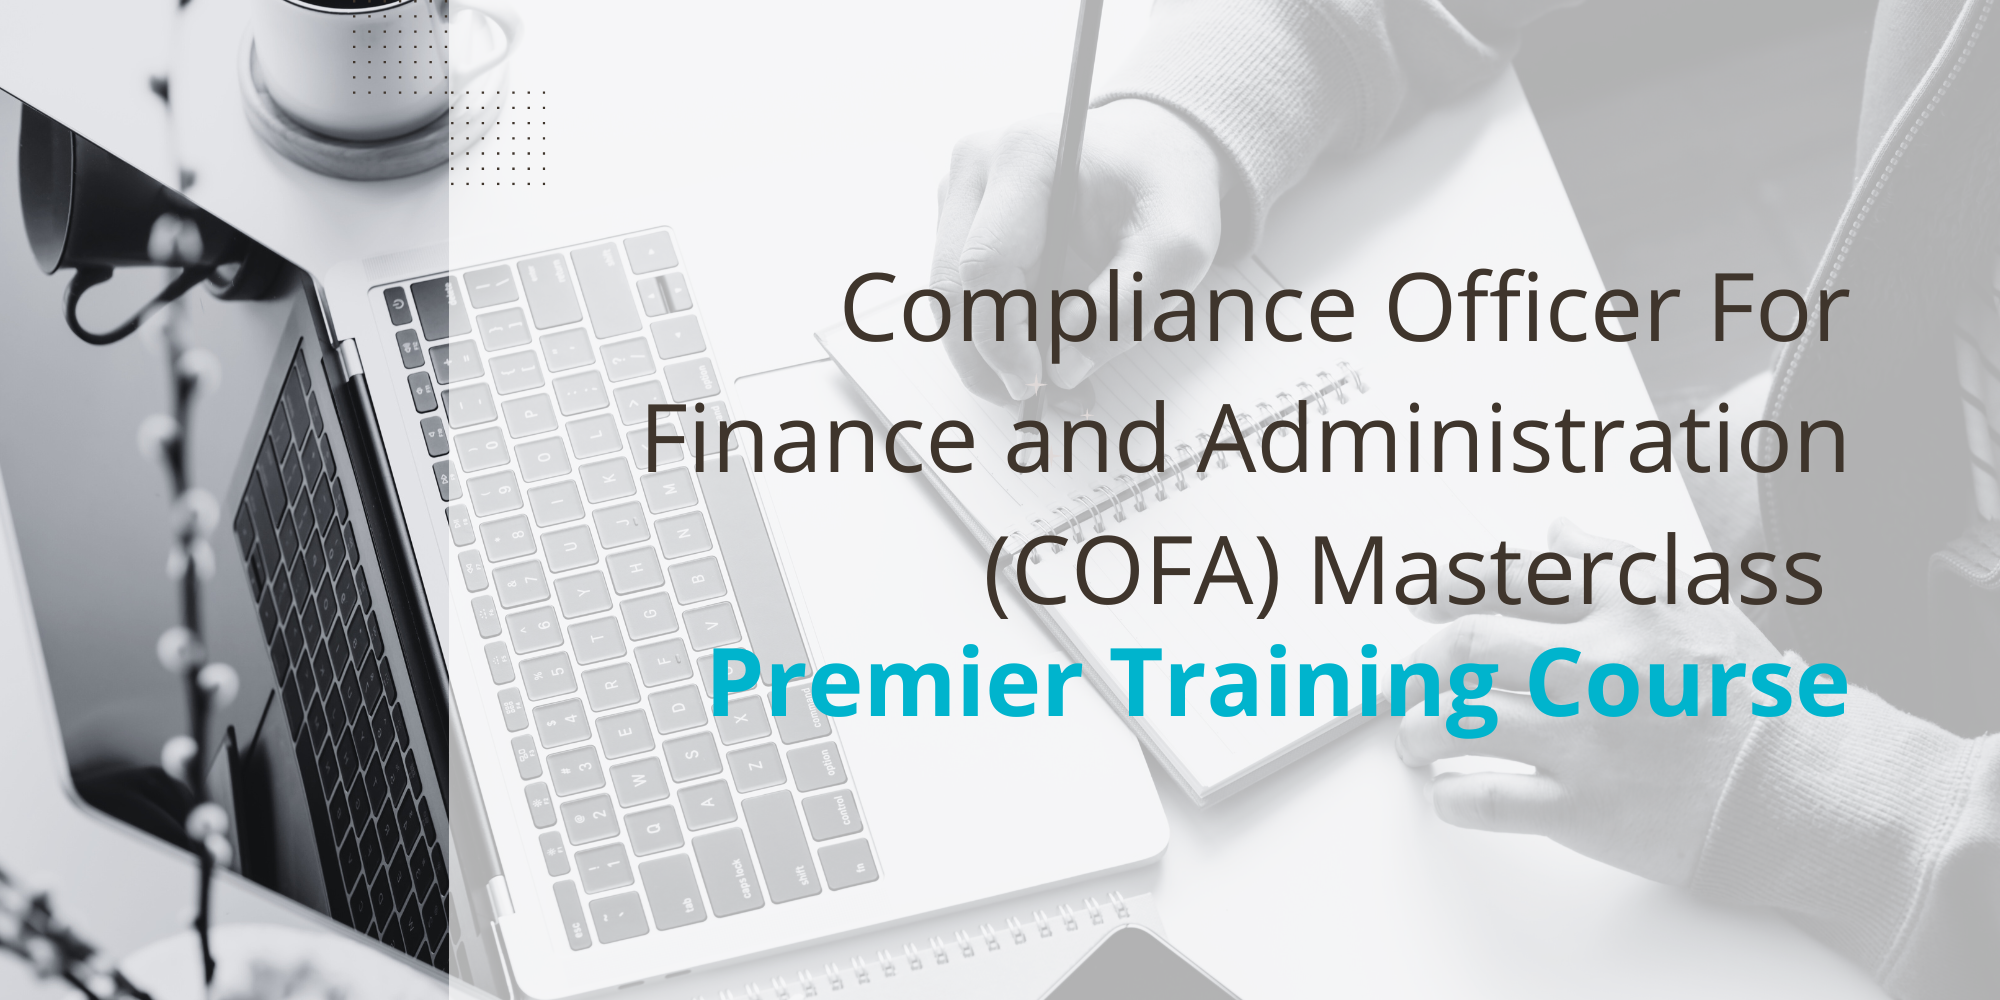 Compliance Officer For Finance and Administration (COFA) Masterclass Course